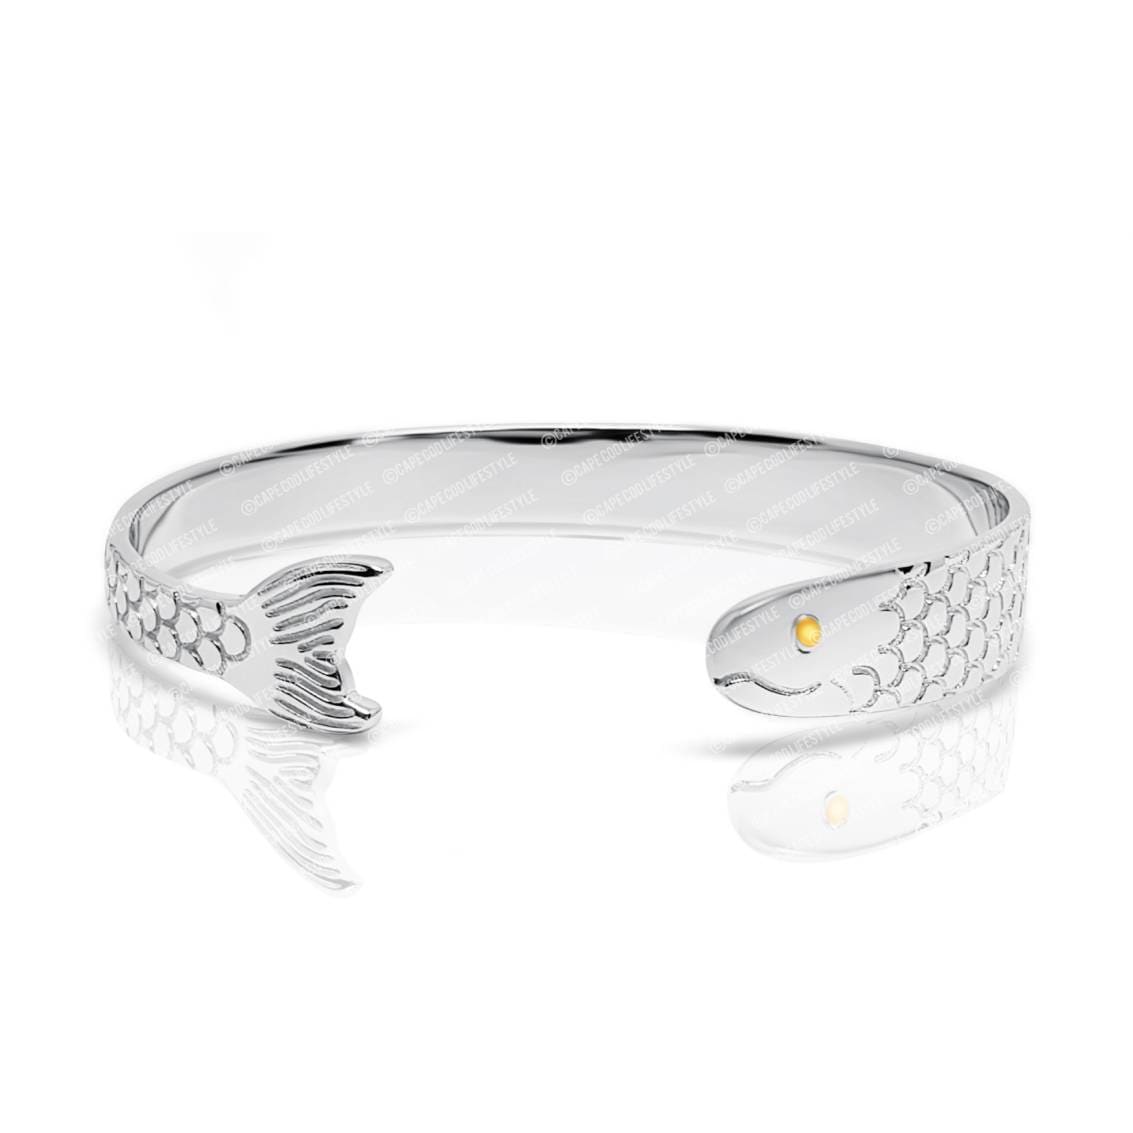 Cape Cod Fish Bracelet - Solid 925 Silver & Real 14K Gold Eye - Cape Cod Lifestyle